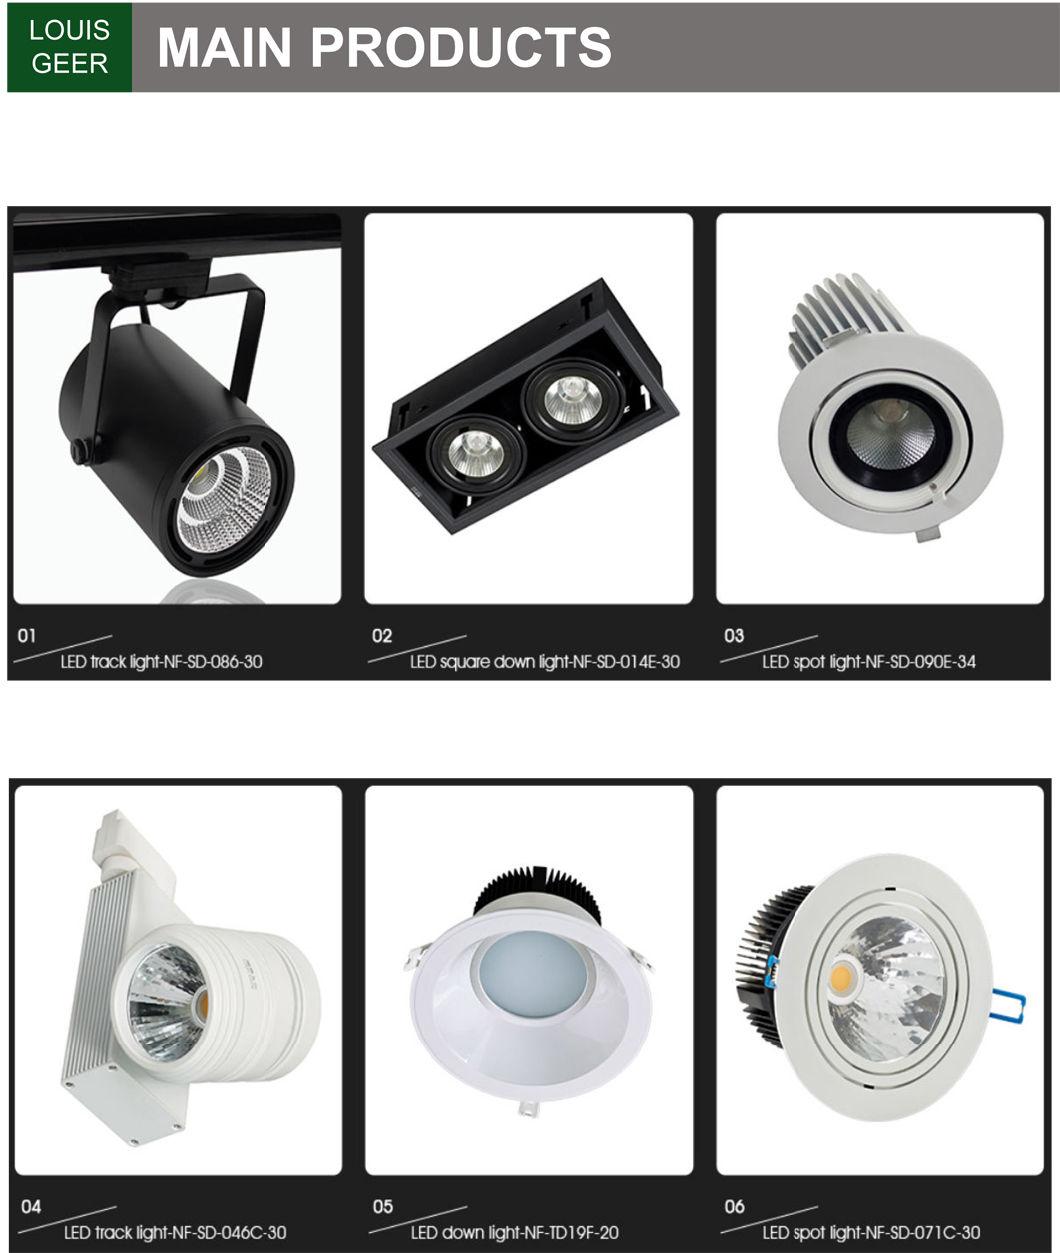 High Lumen Output IP20 Recessed Mounted 20W Dimmable LED Spotlight